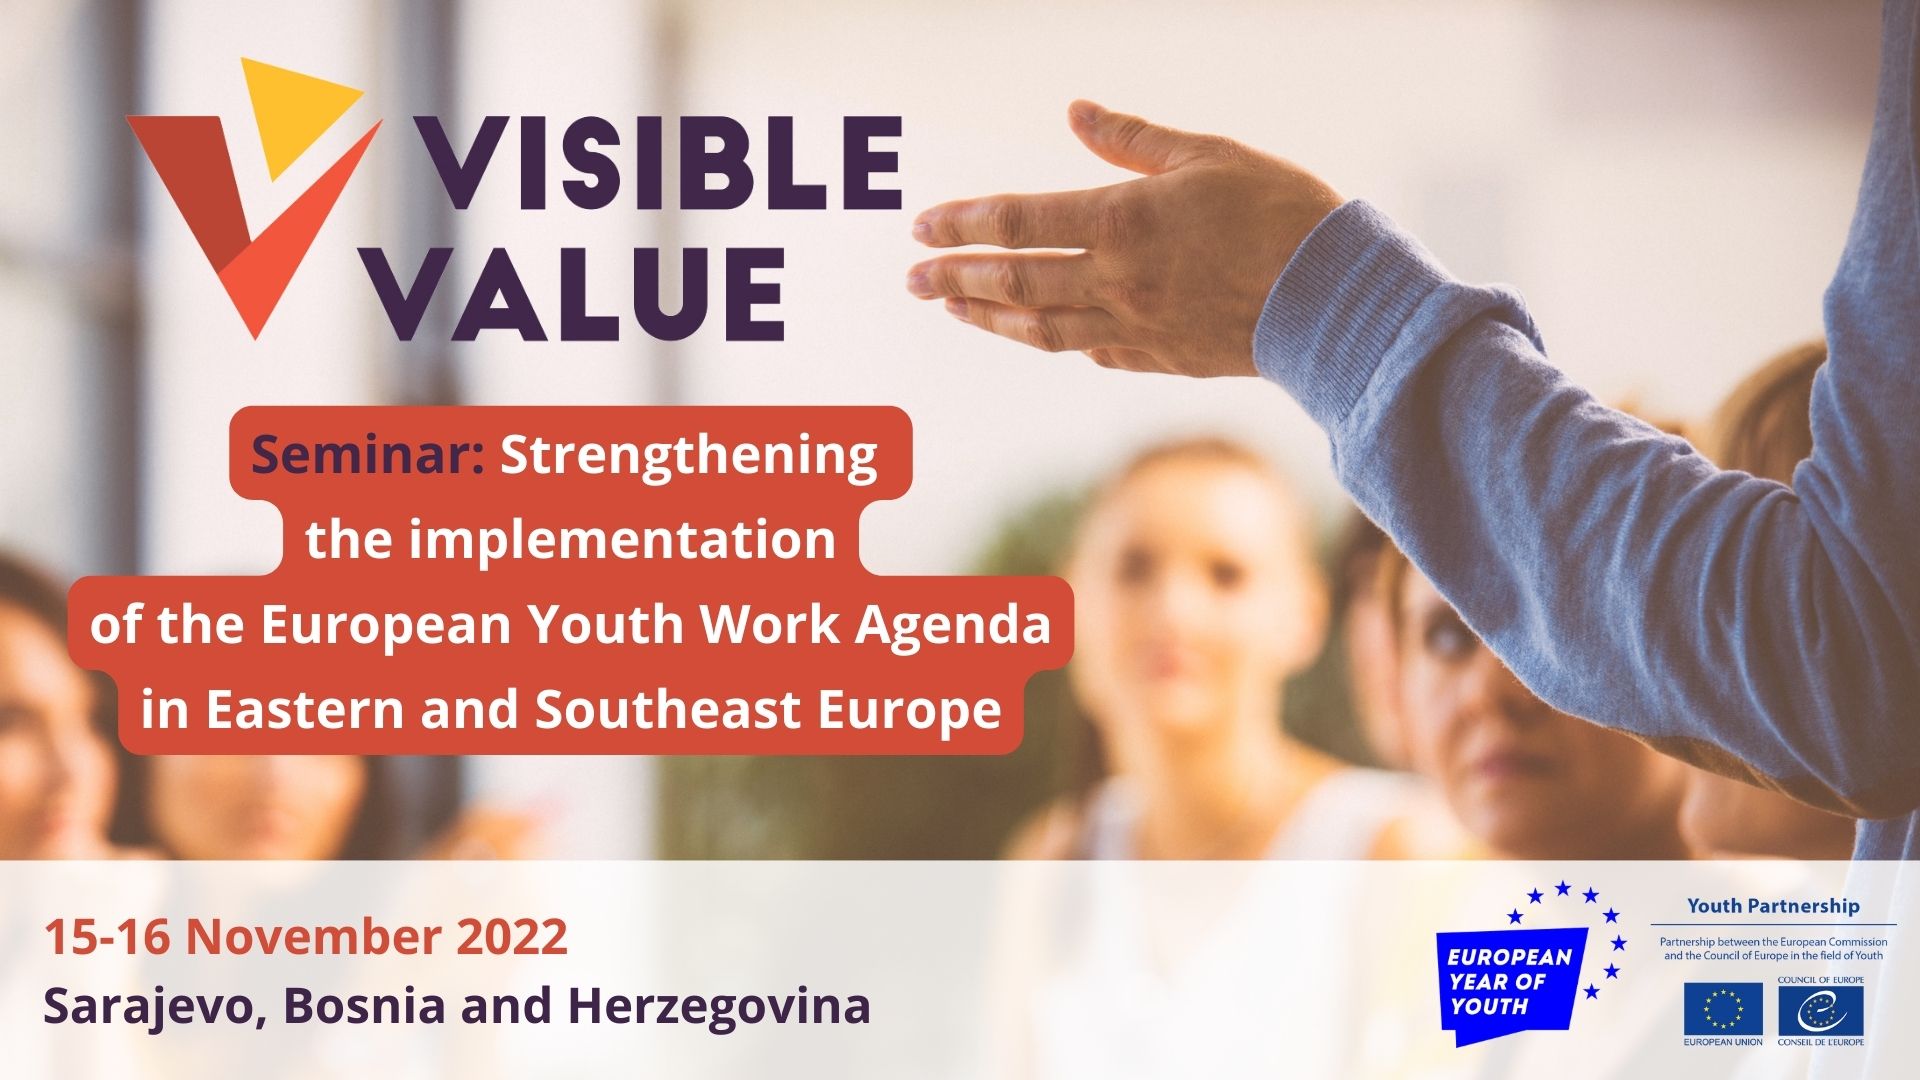 Visible Value – strengthening the implementation of the European Youth Work Agenda in Eastern and Southeast Europe